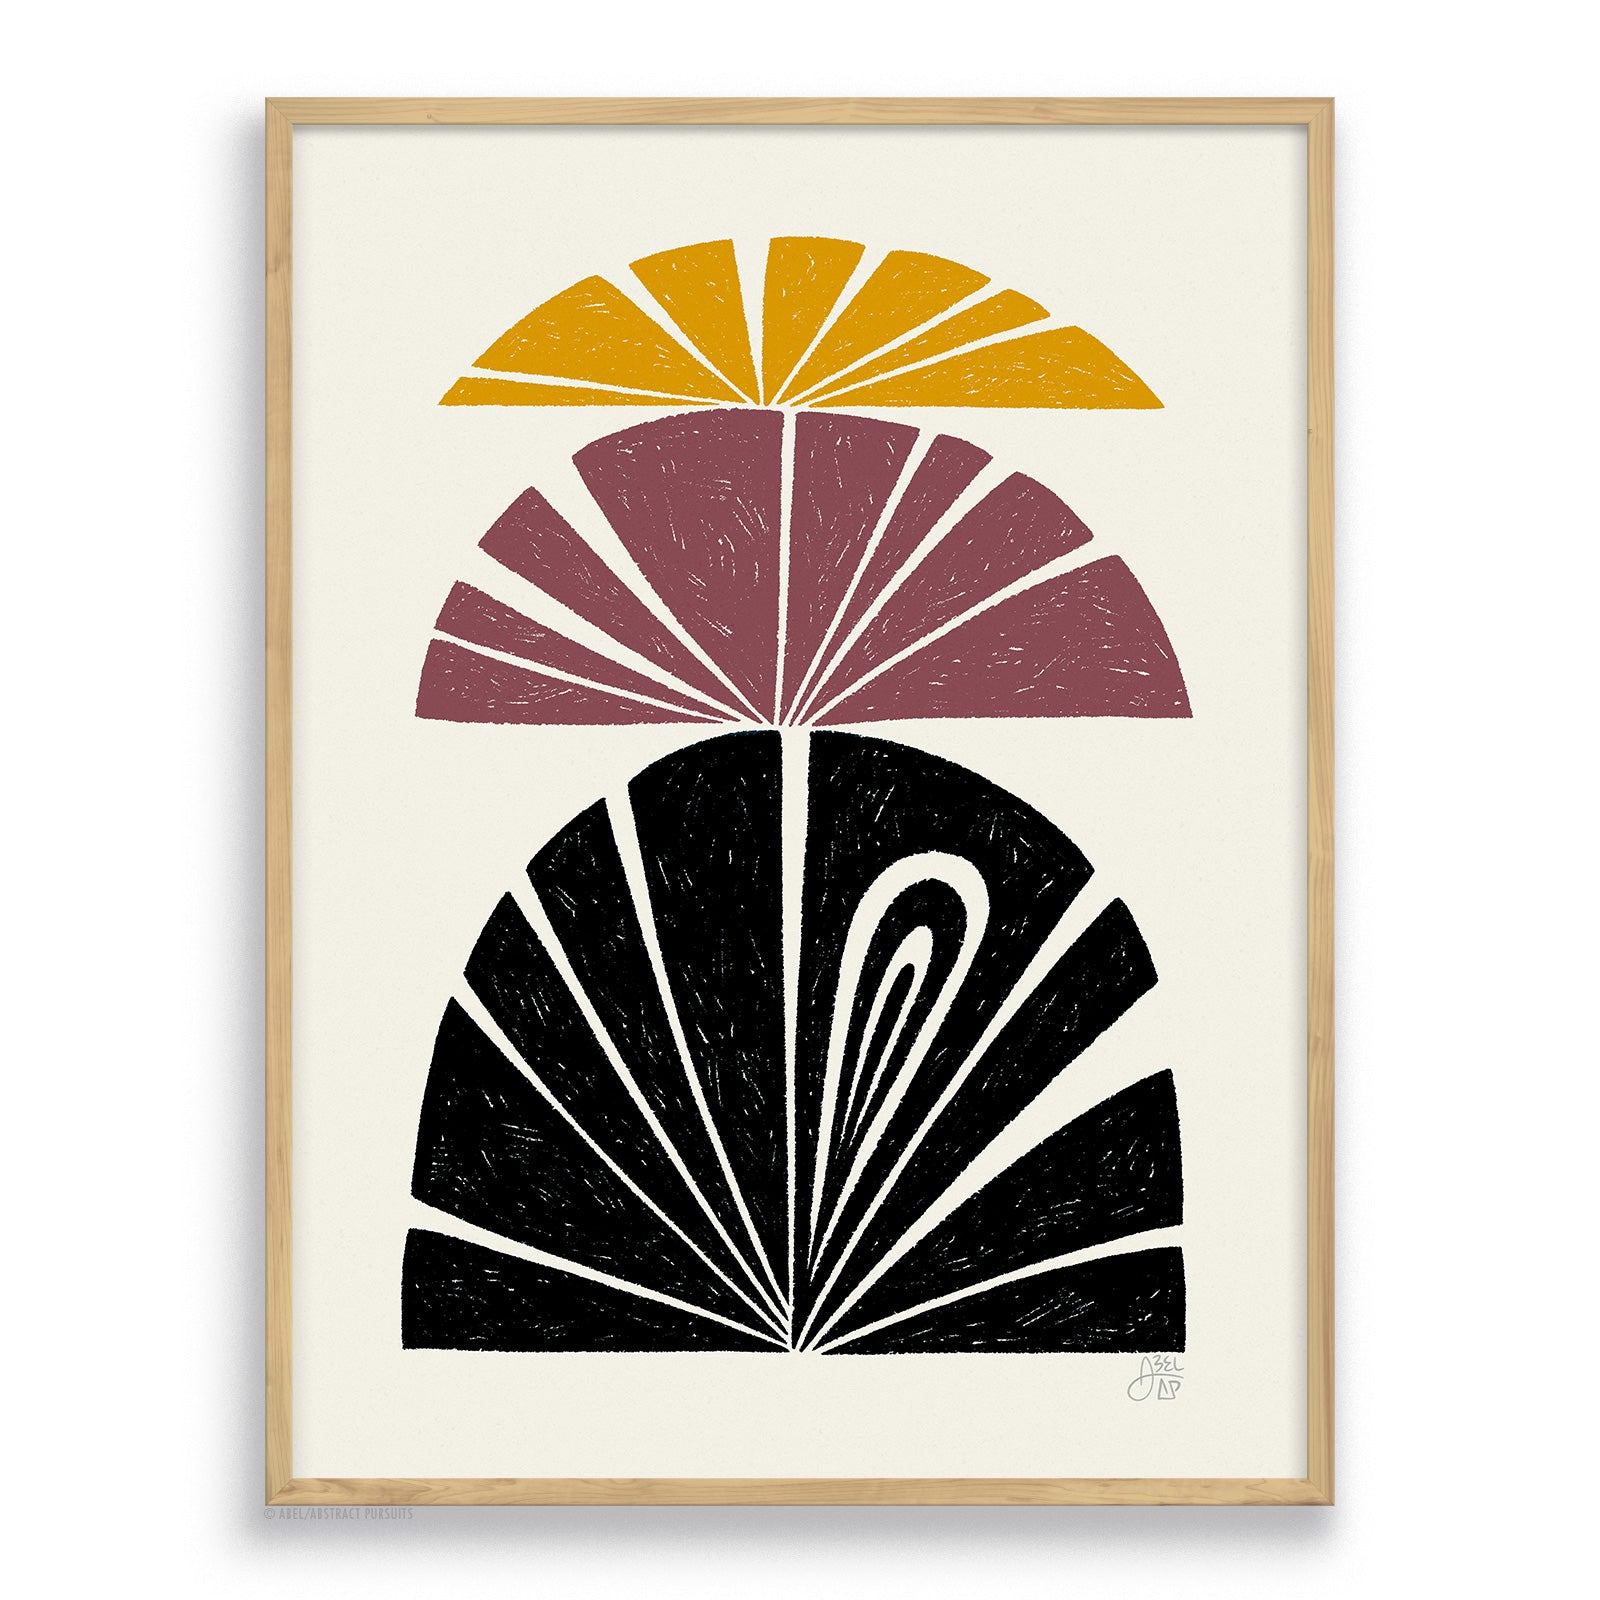 Hickory framed, yellow, purple and black Abstract plant flower stack design, bamboo paper art print by Erik Abel